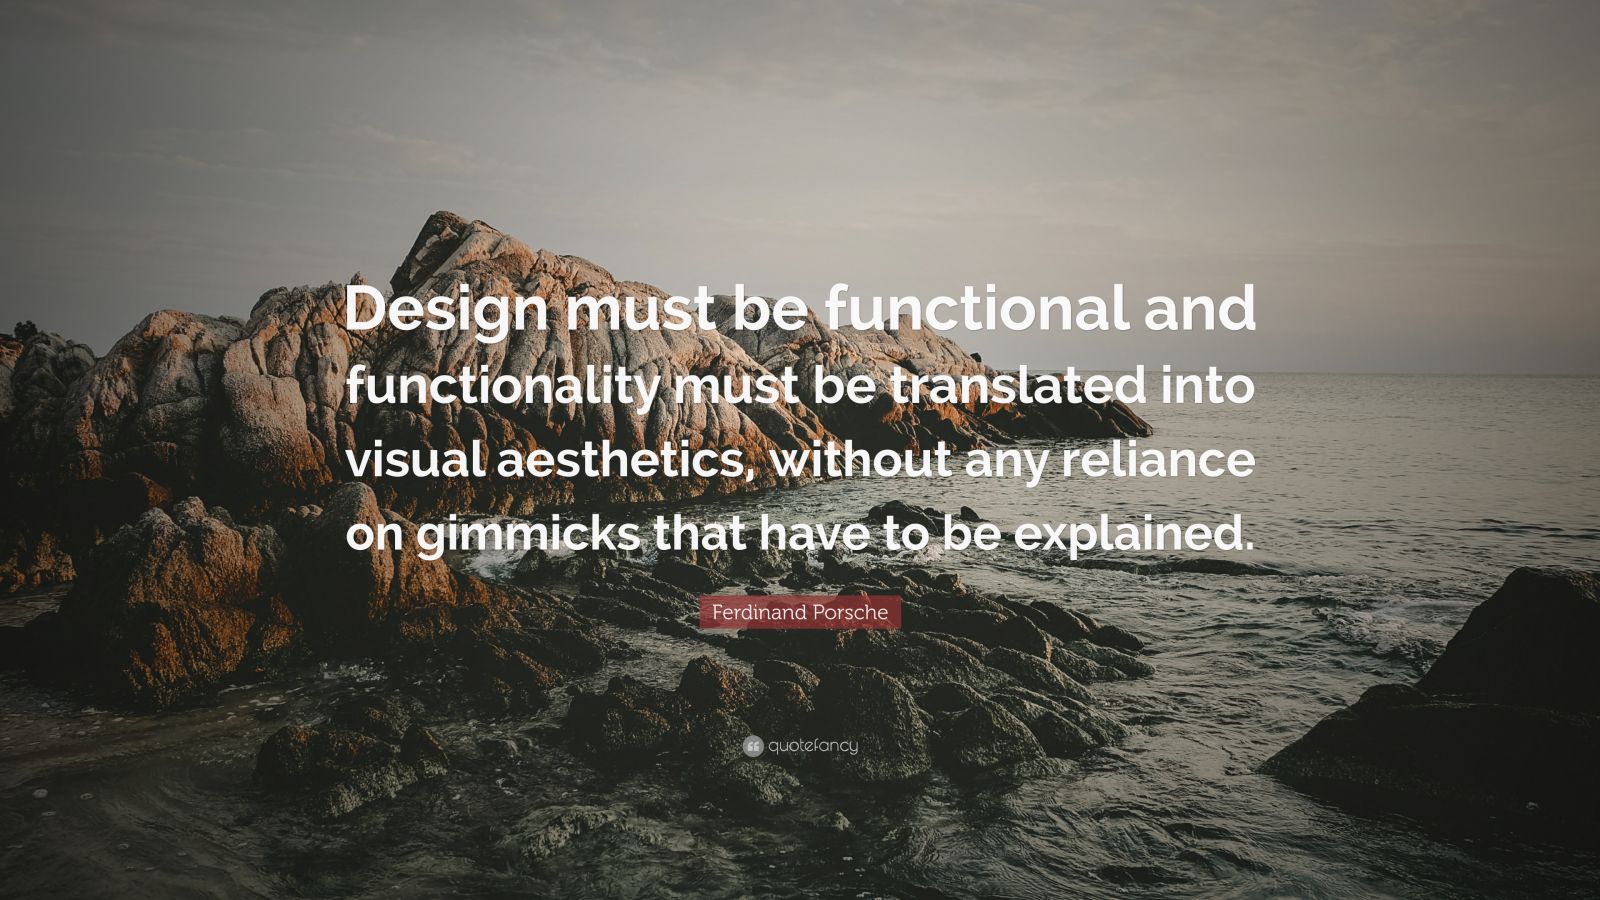 Ferdinand Porsche Quote: “Design must be functional and functionality